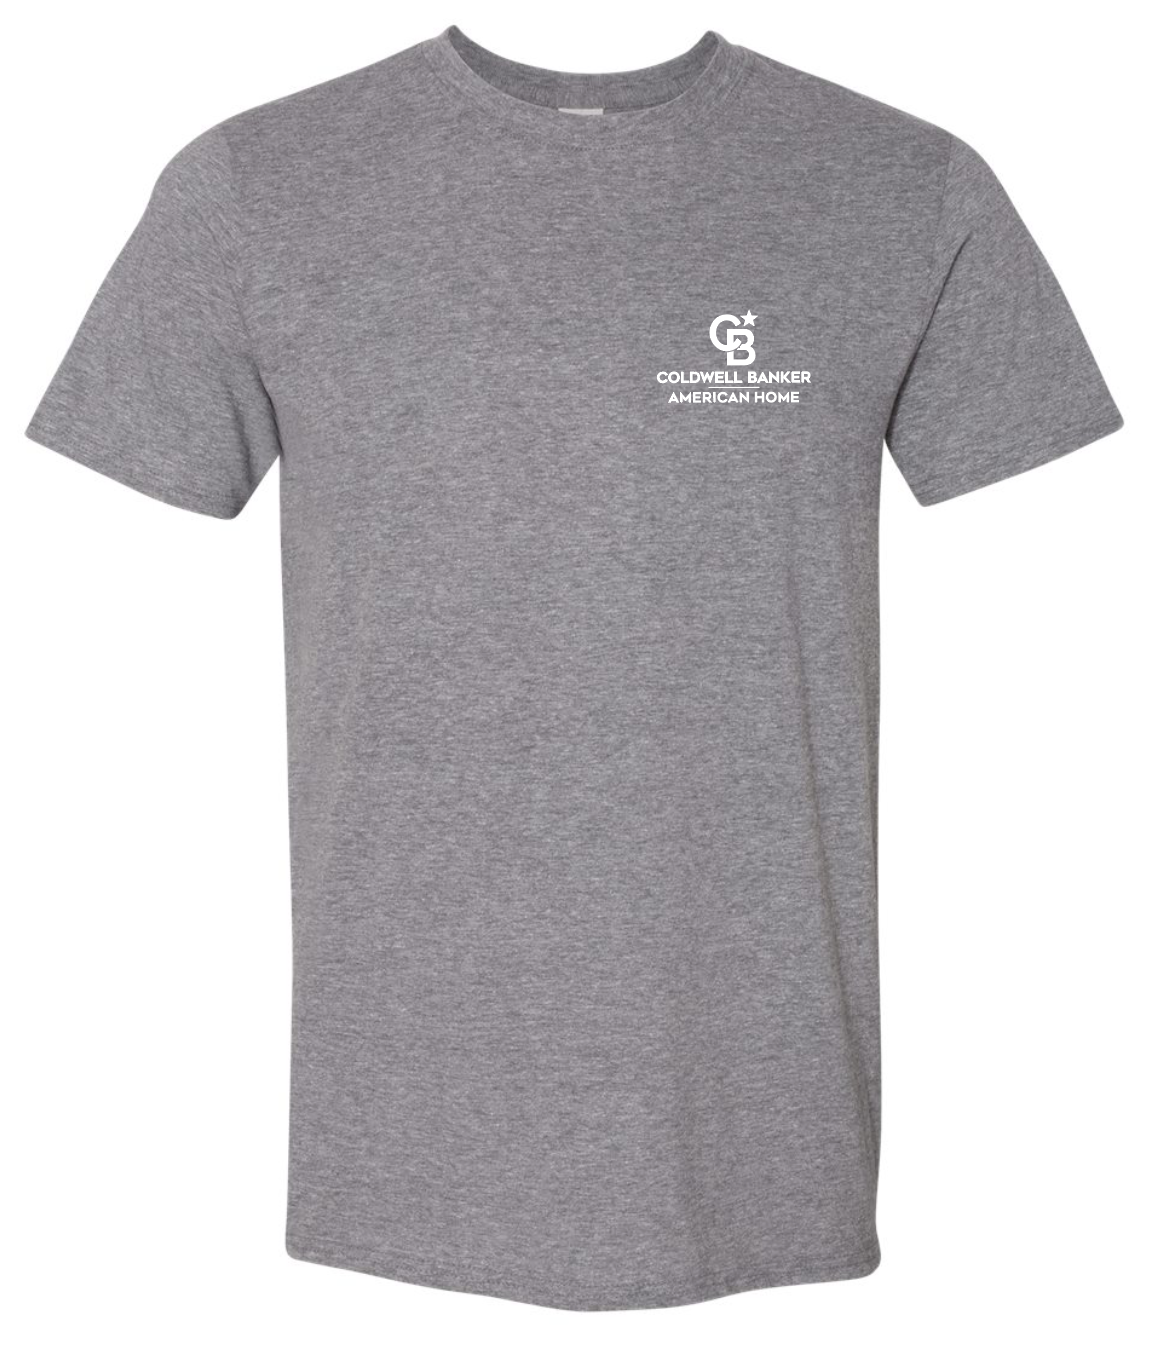 Coldwell Banker Gildan Softstyle T-Shirt - Left Chest